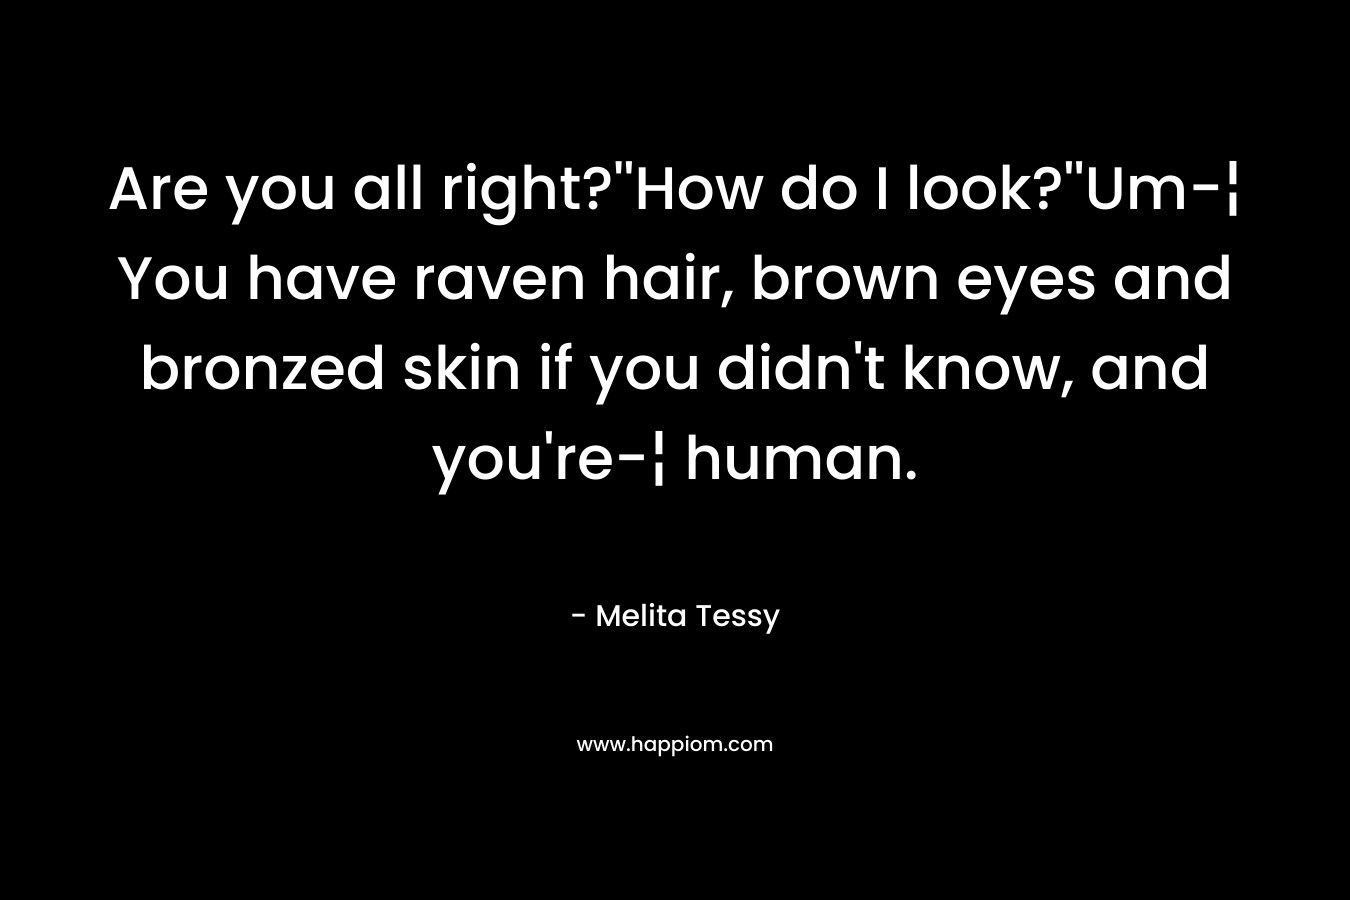 Are you all right?”How do I look?”Um-¦ You have raven hair, brown eyes and bronzed skin if you didn’t know, and you’re-¦ human. – Melita Tessy